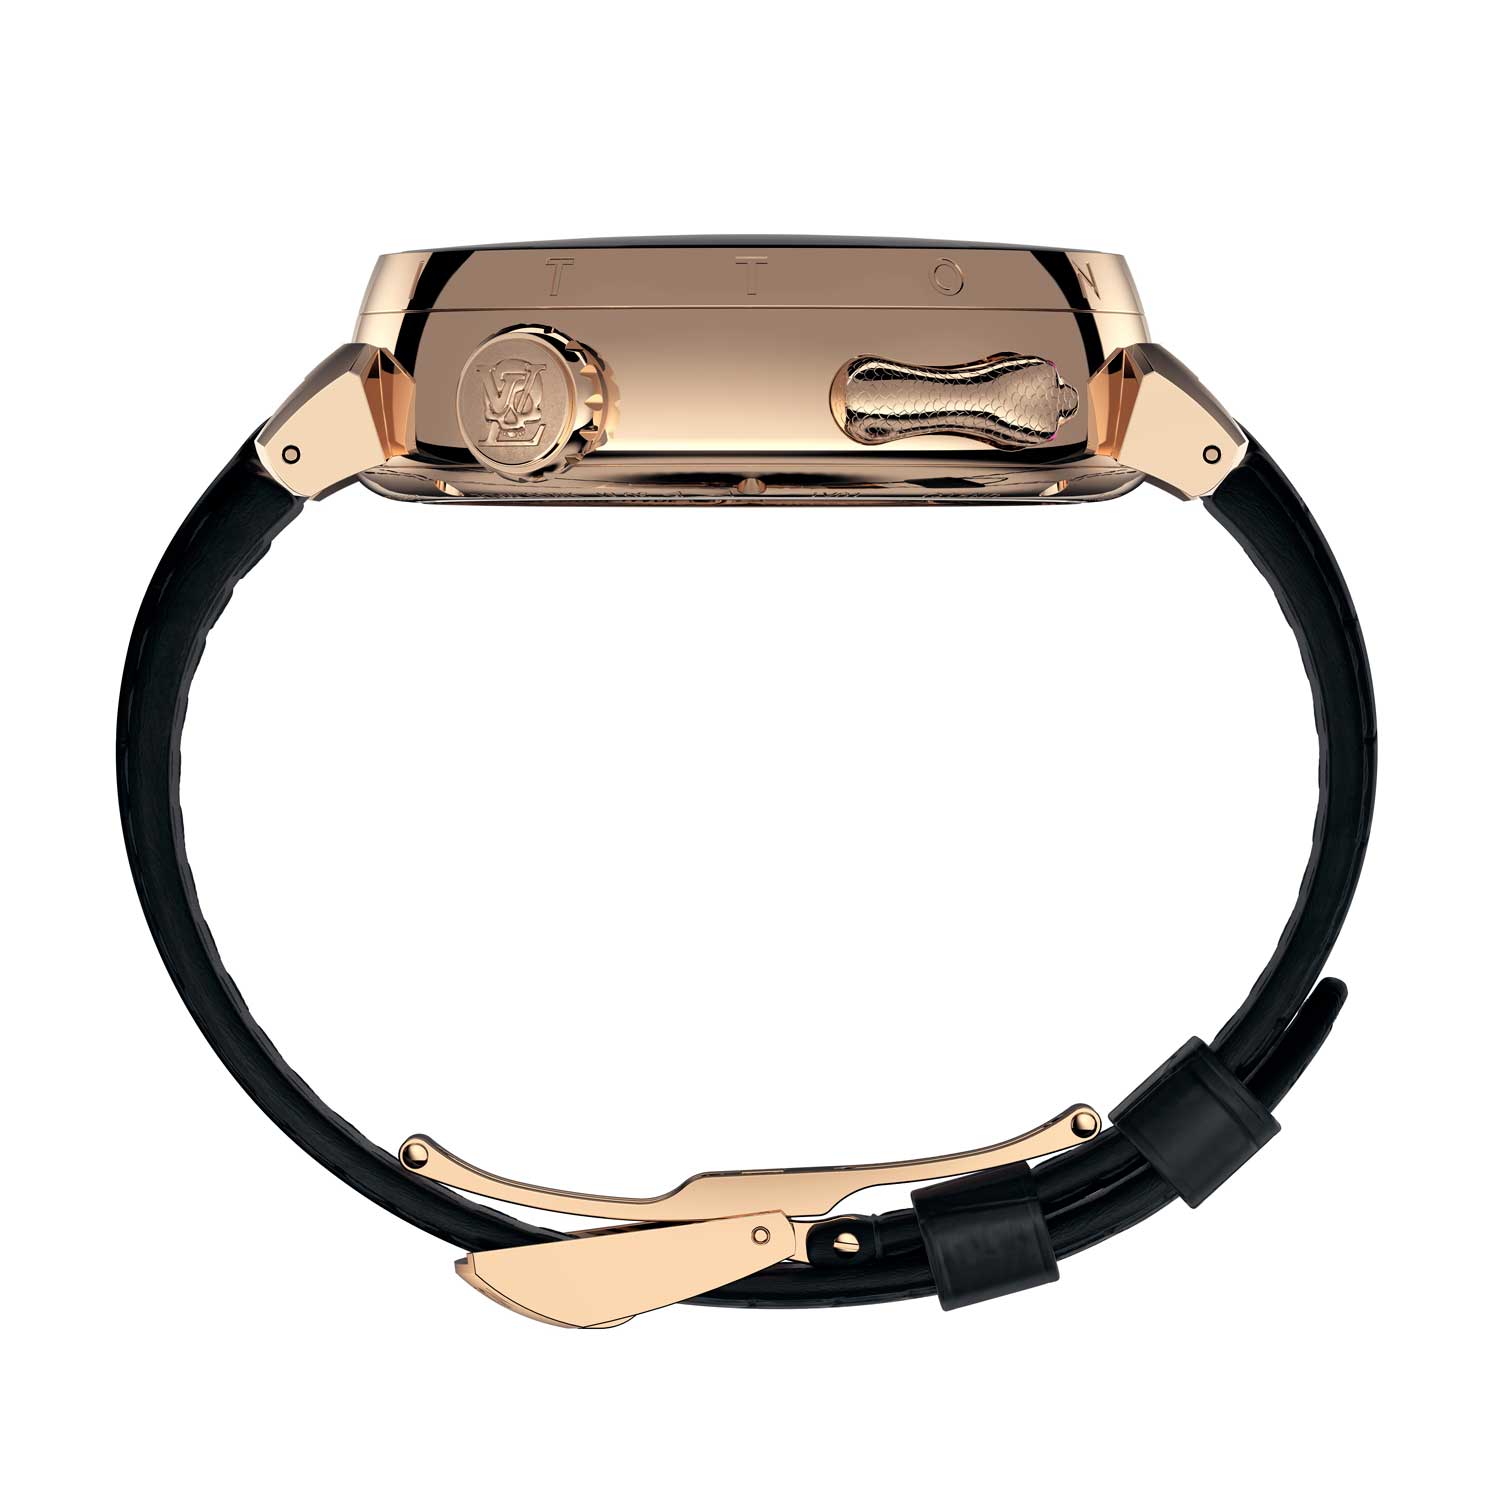 The 18-karat rose gold case measures 46.8mm and is 14.42mm thick